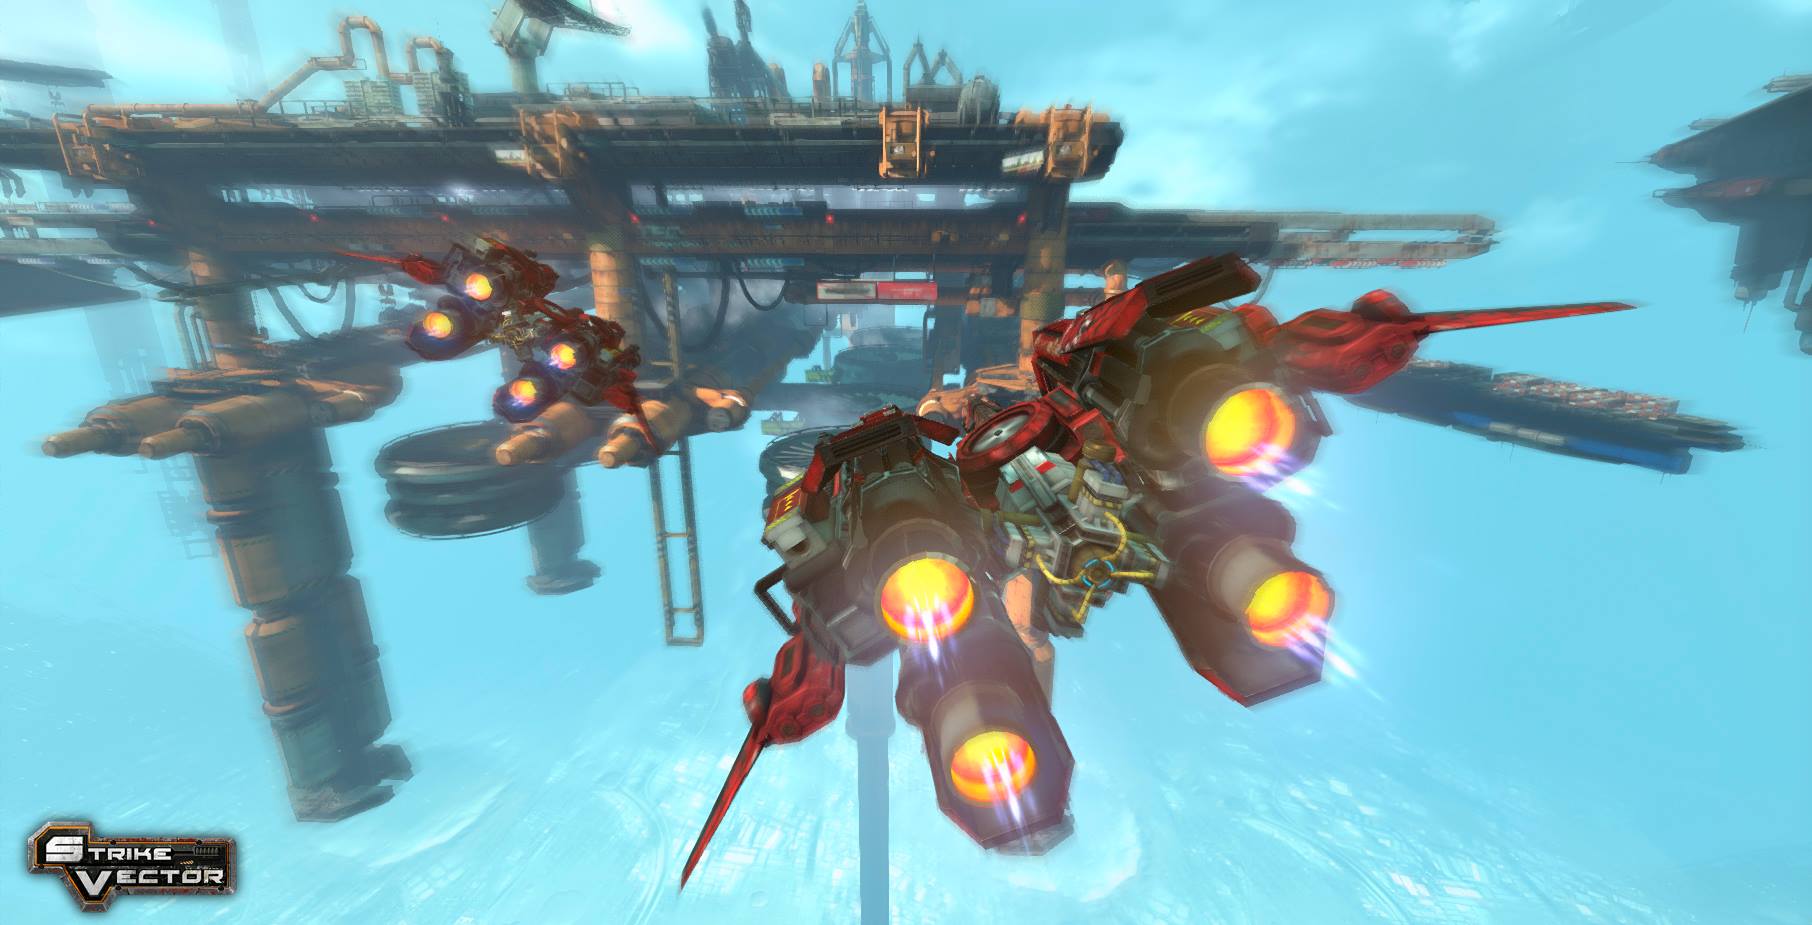 Strike Vector Pics, Video Game Collection